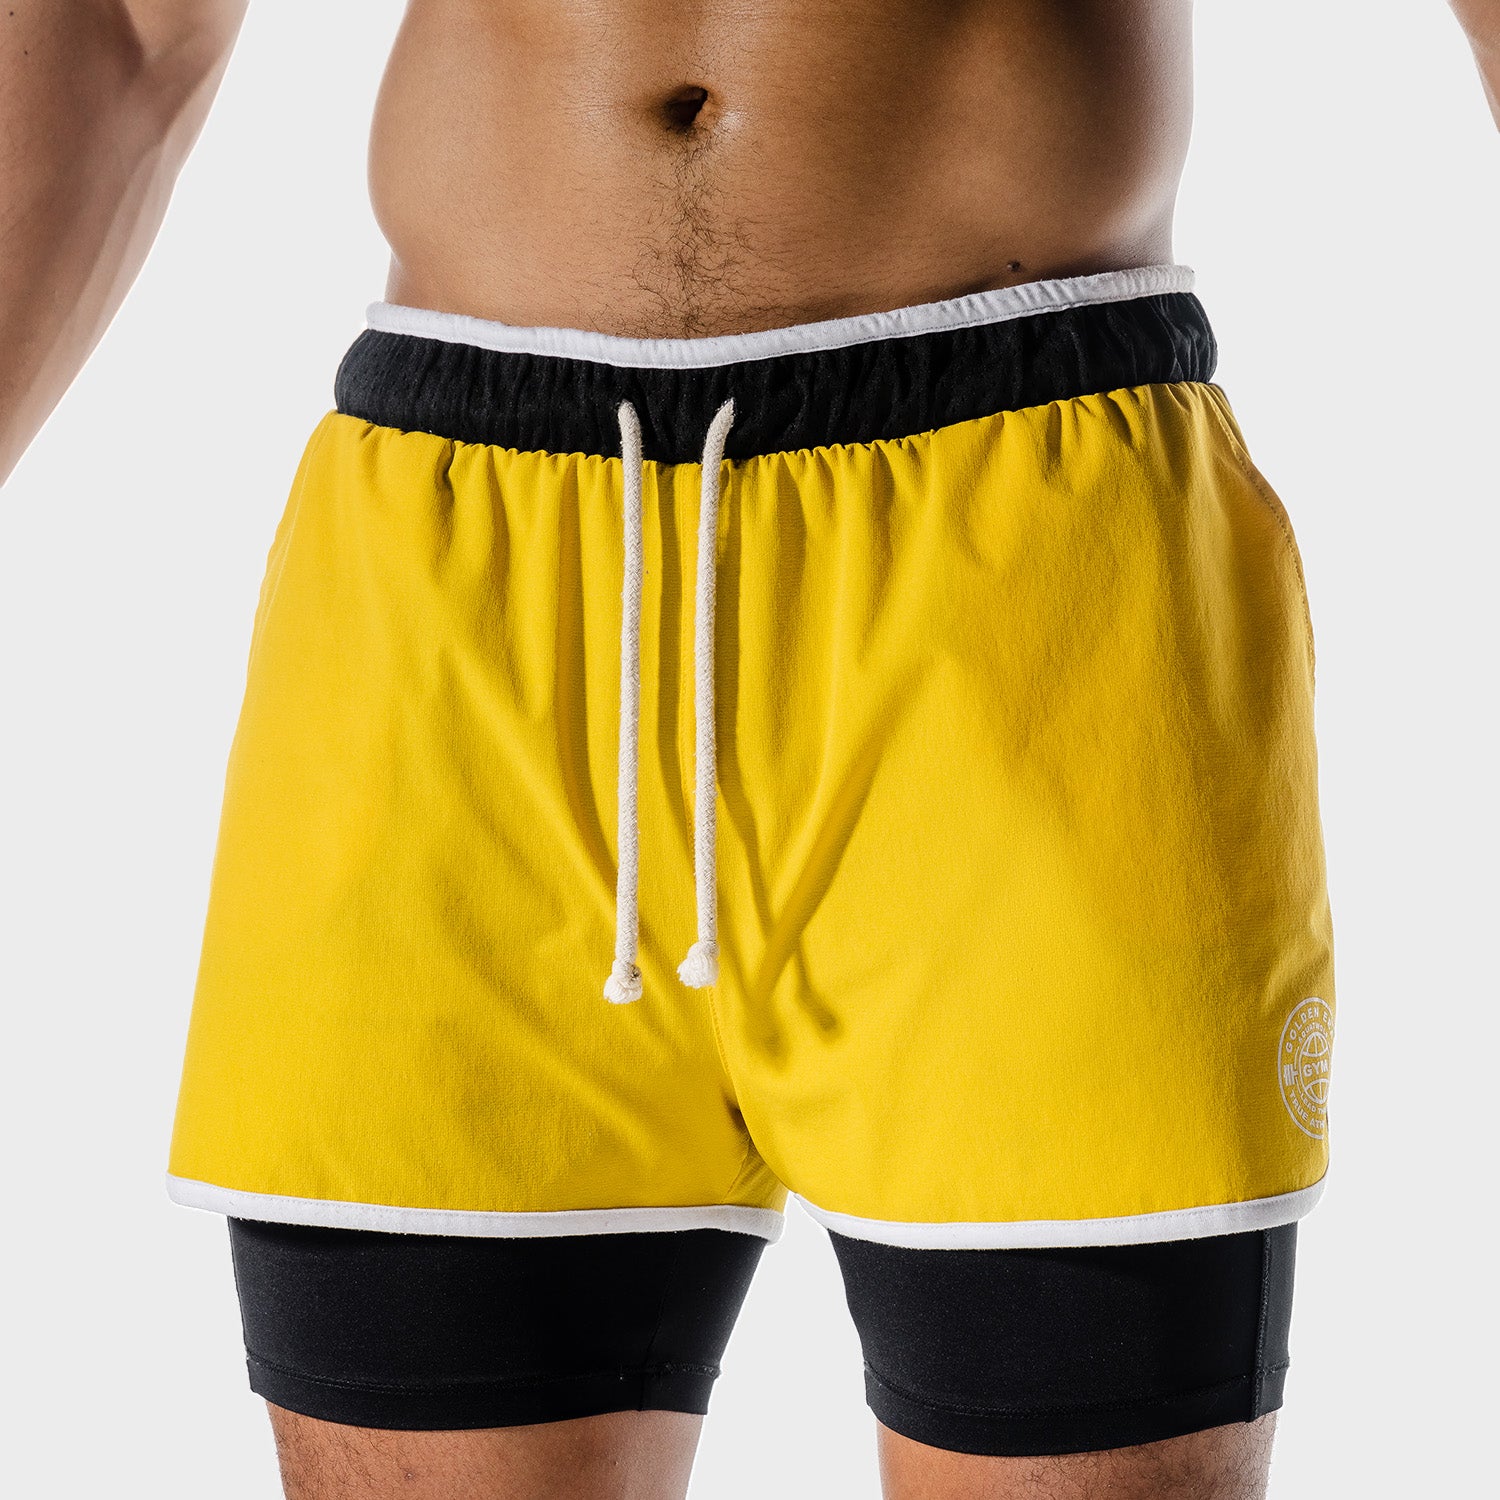 SQUATWOF-gym-wear-golden-era-2-in-1-shorts-yellow-workout-shorts-for-men